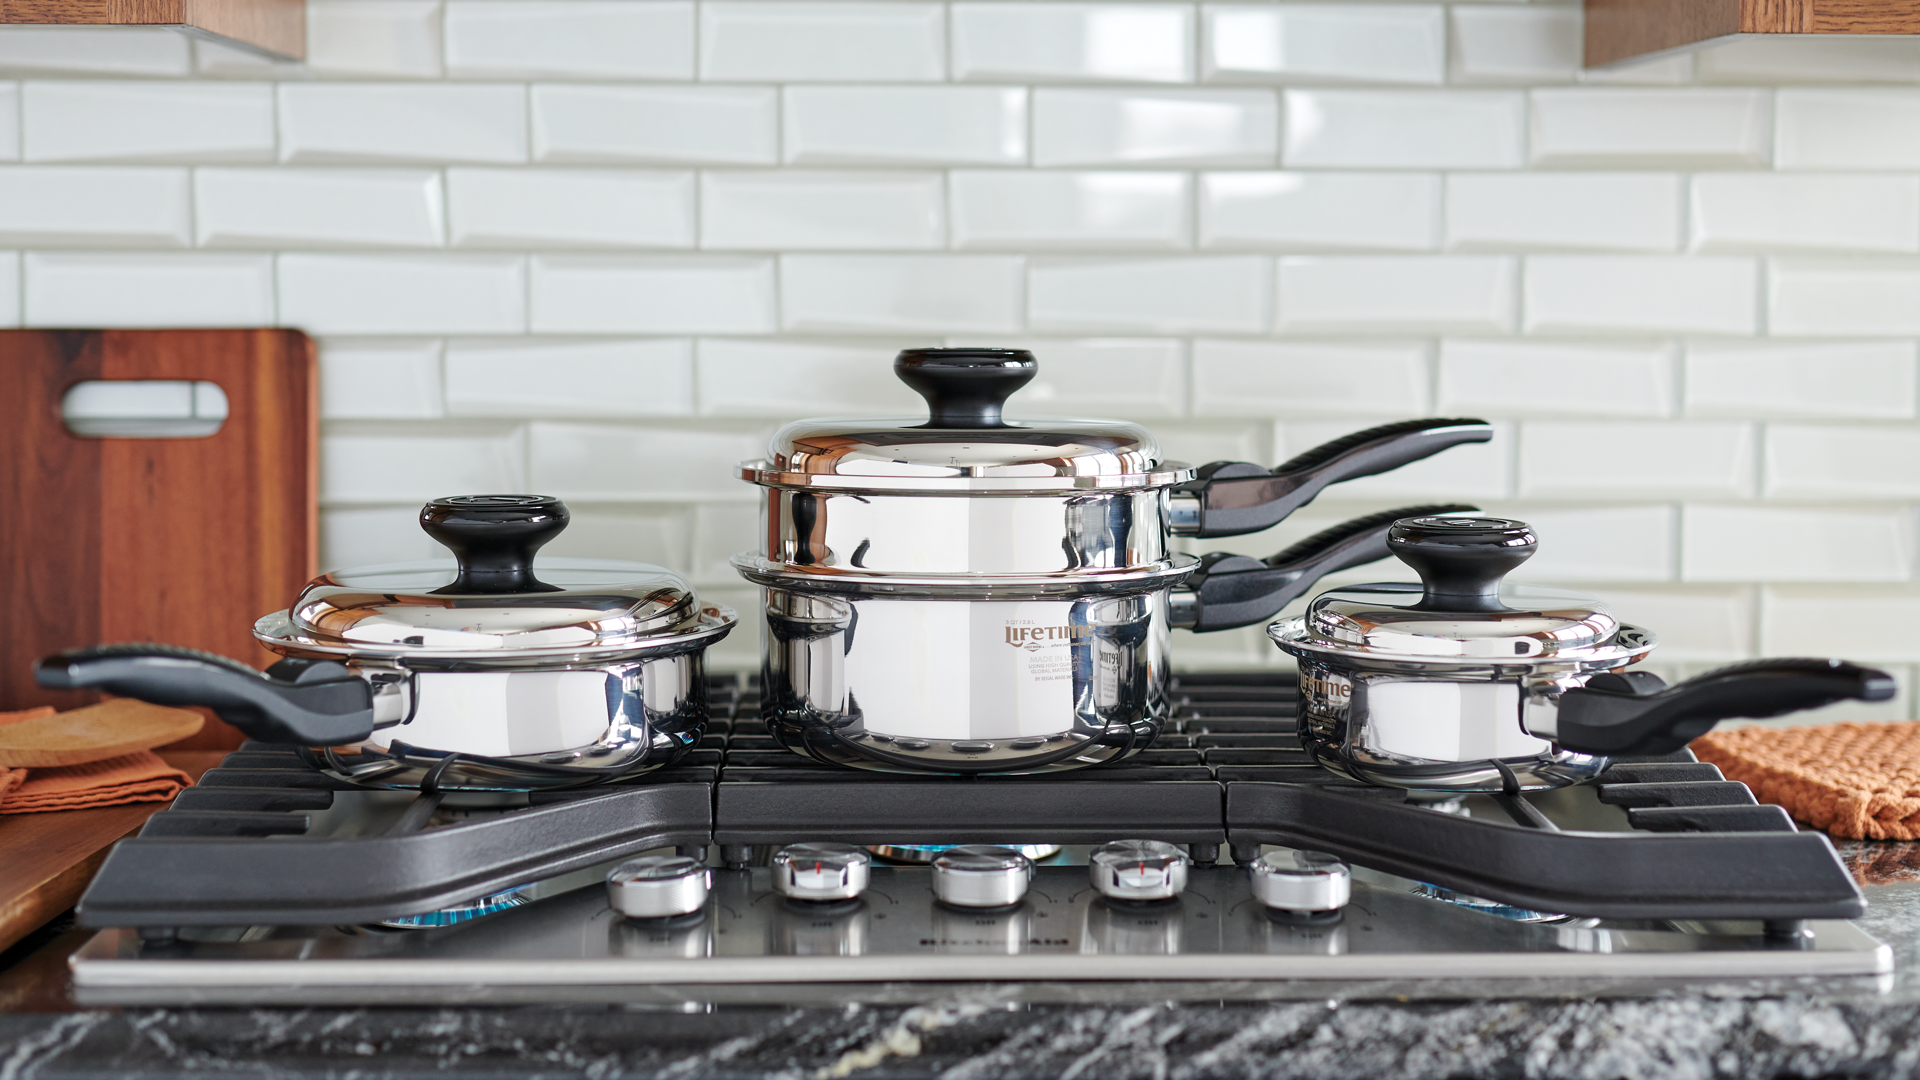 Stovetop Pots, Pans and Cookware - What Should I Buy?